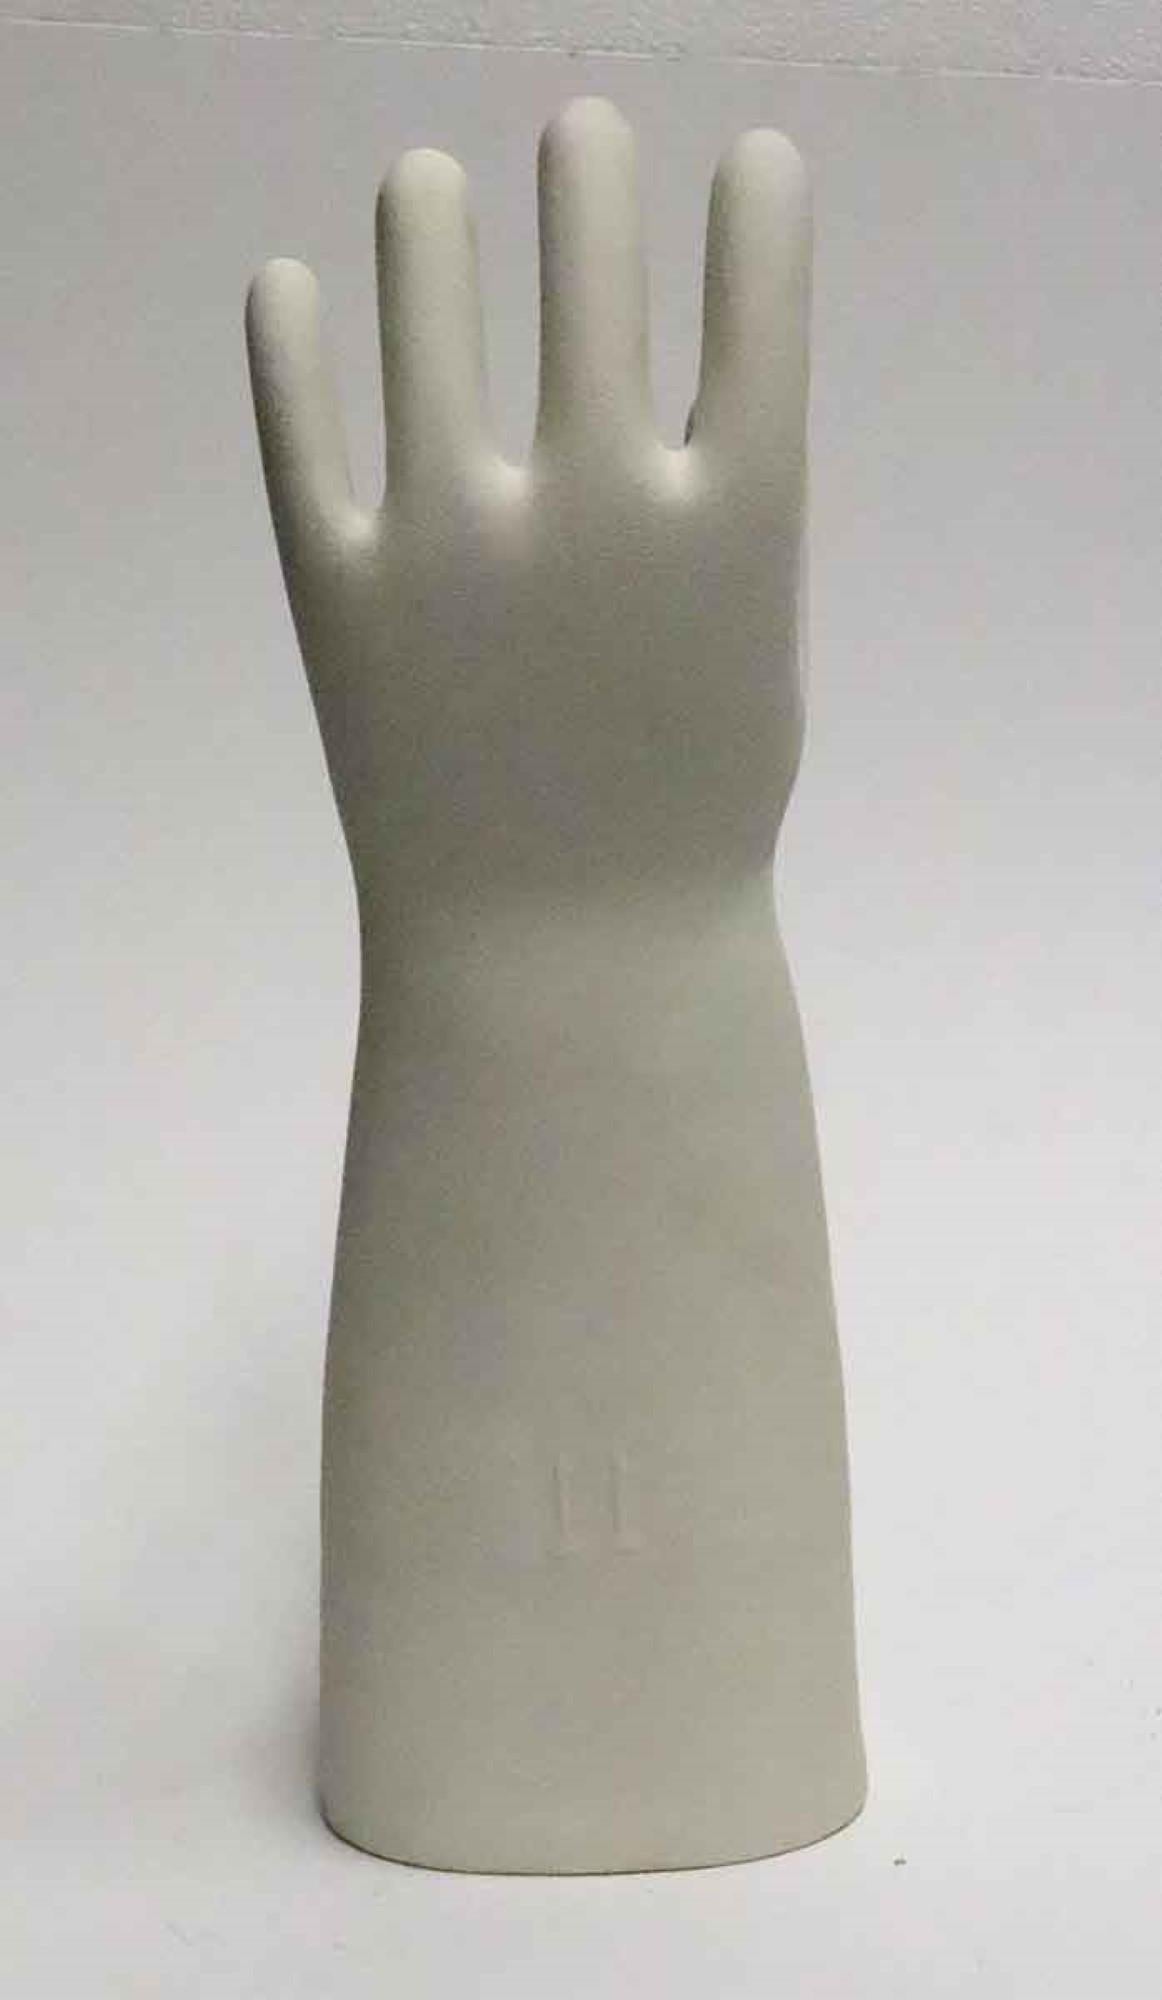 Late 20th Century 1990s Vintage White Ceramic Left Hand Model Glove or Jewelry Display